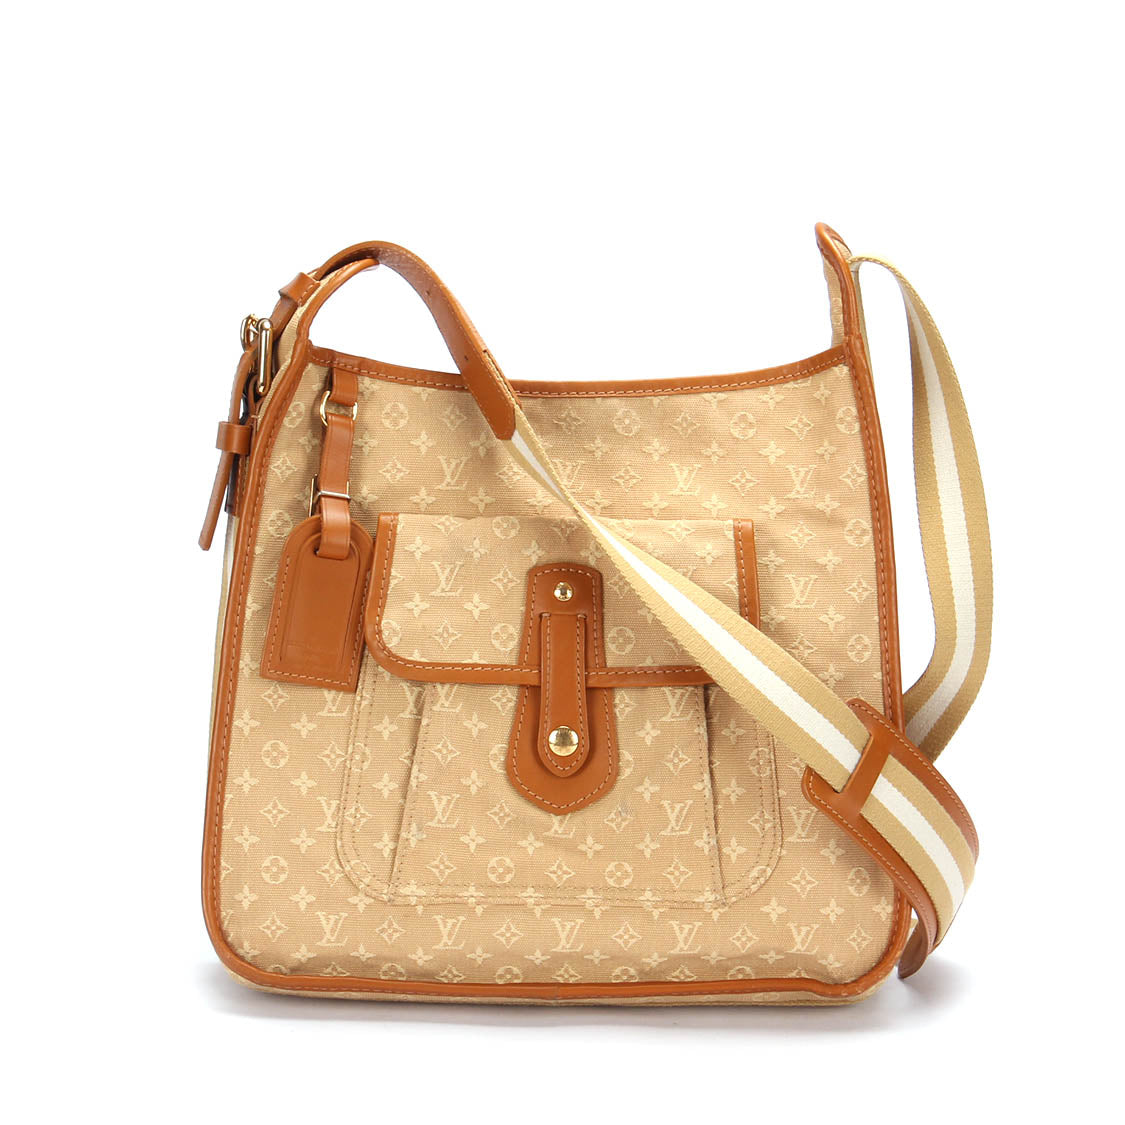 Louis Vuitton Monogram Mini Lin Mary Kate Besace Canvas Crossbody Bag in Good condition